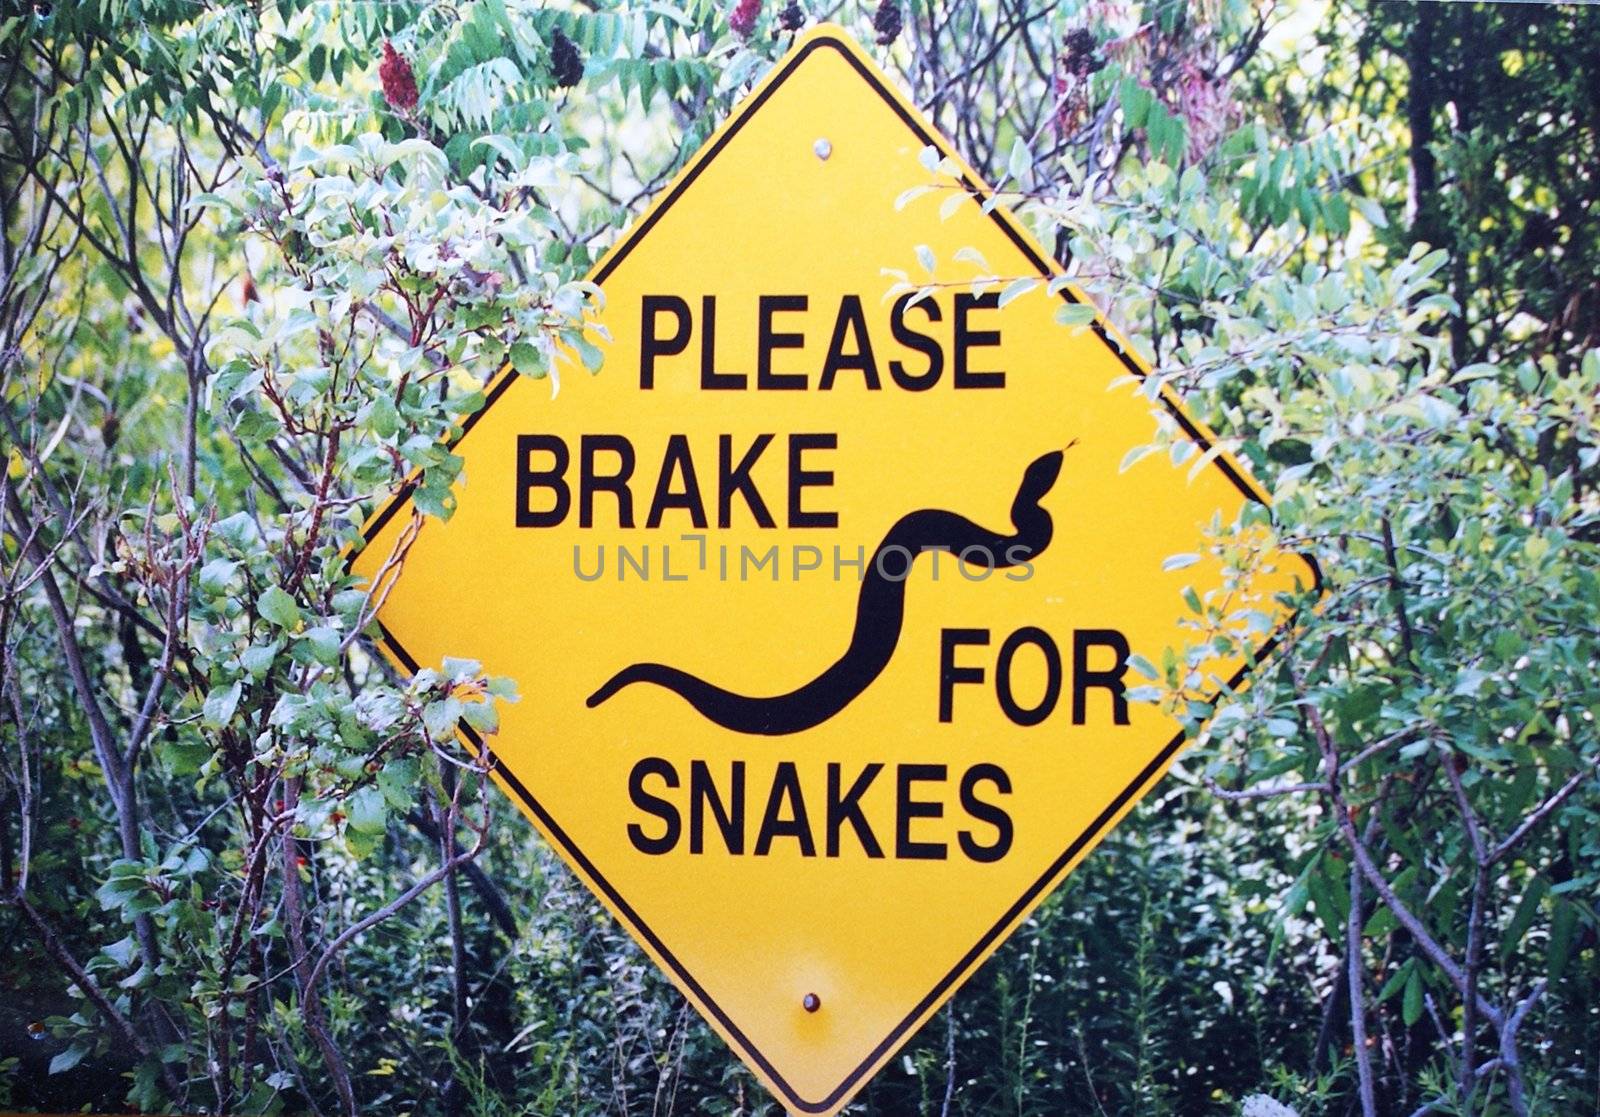 A yellow sign that is meant to protect snakes from getting killed on the road.